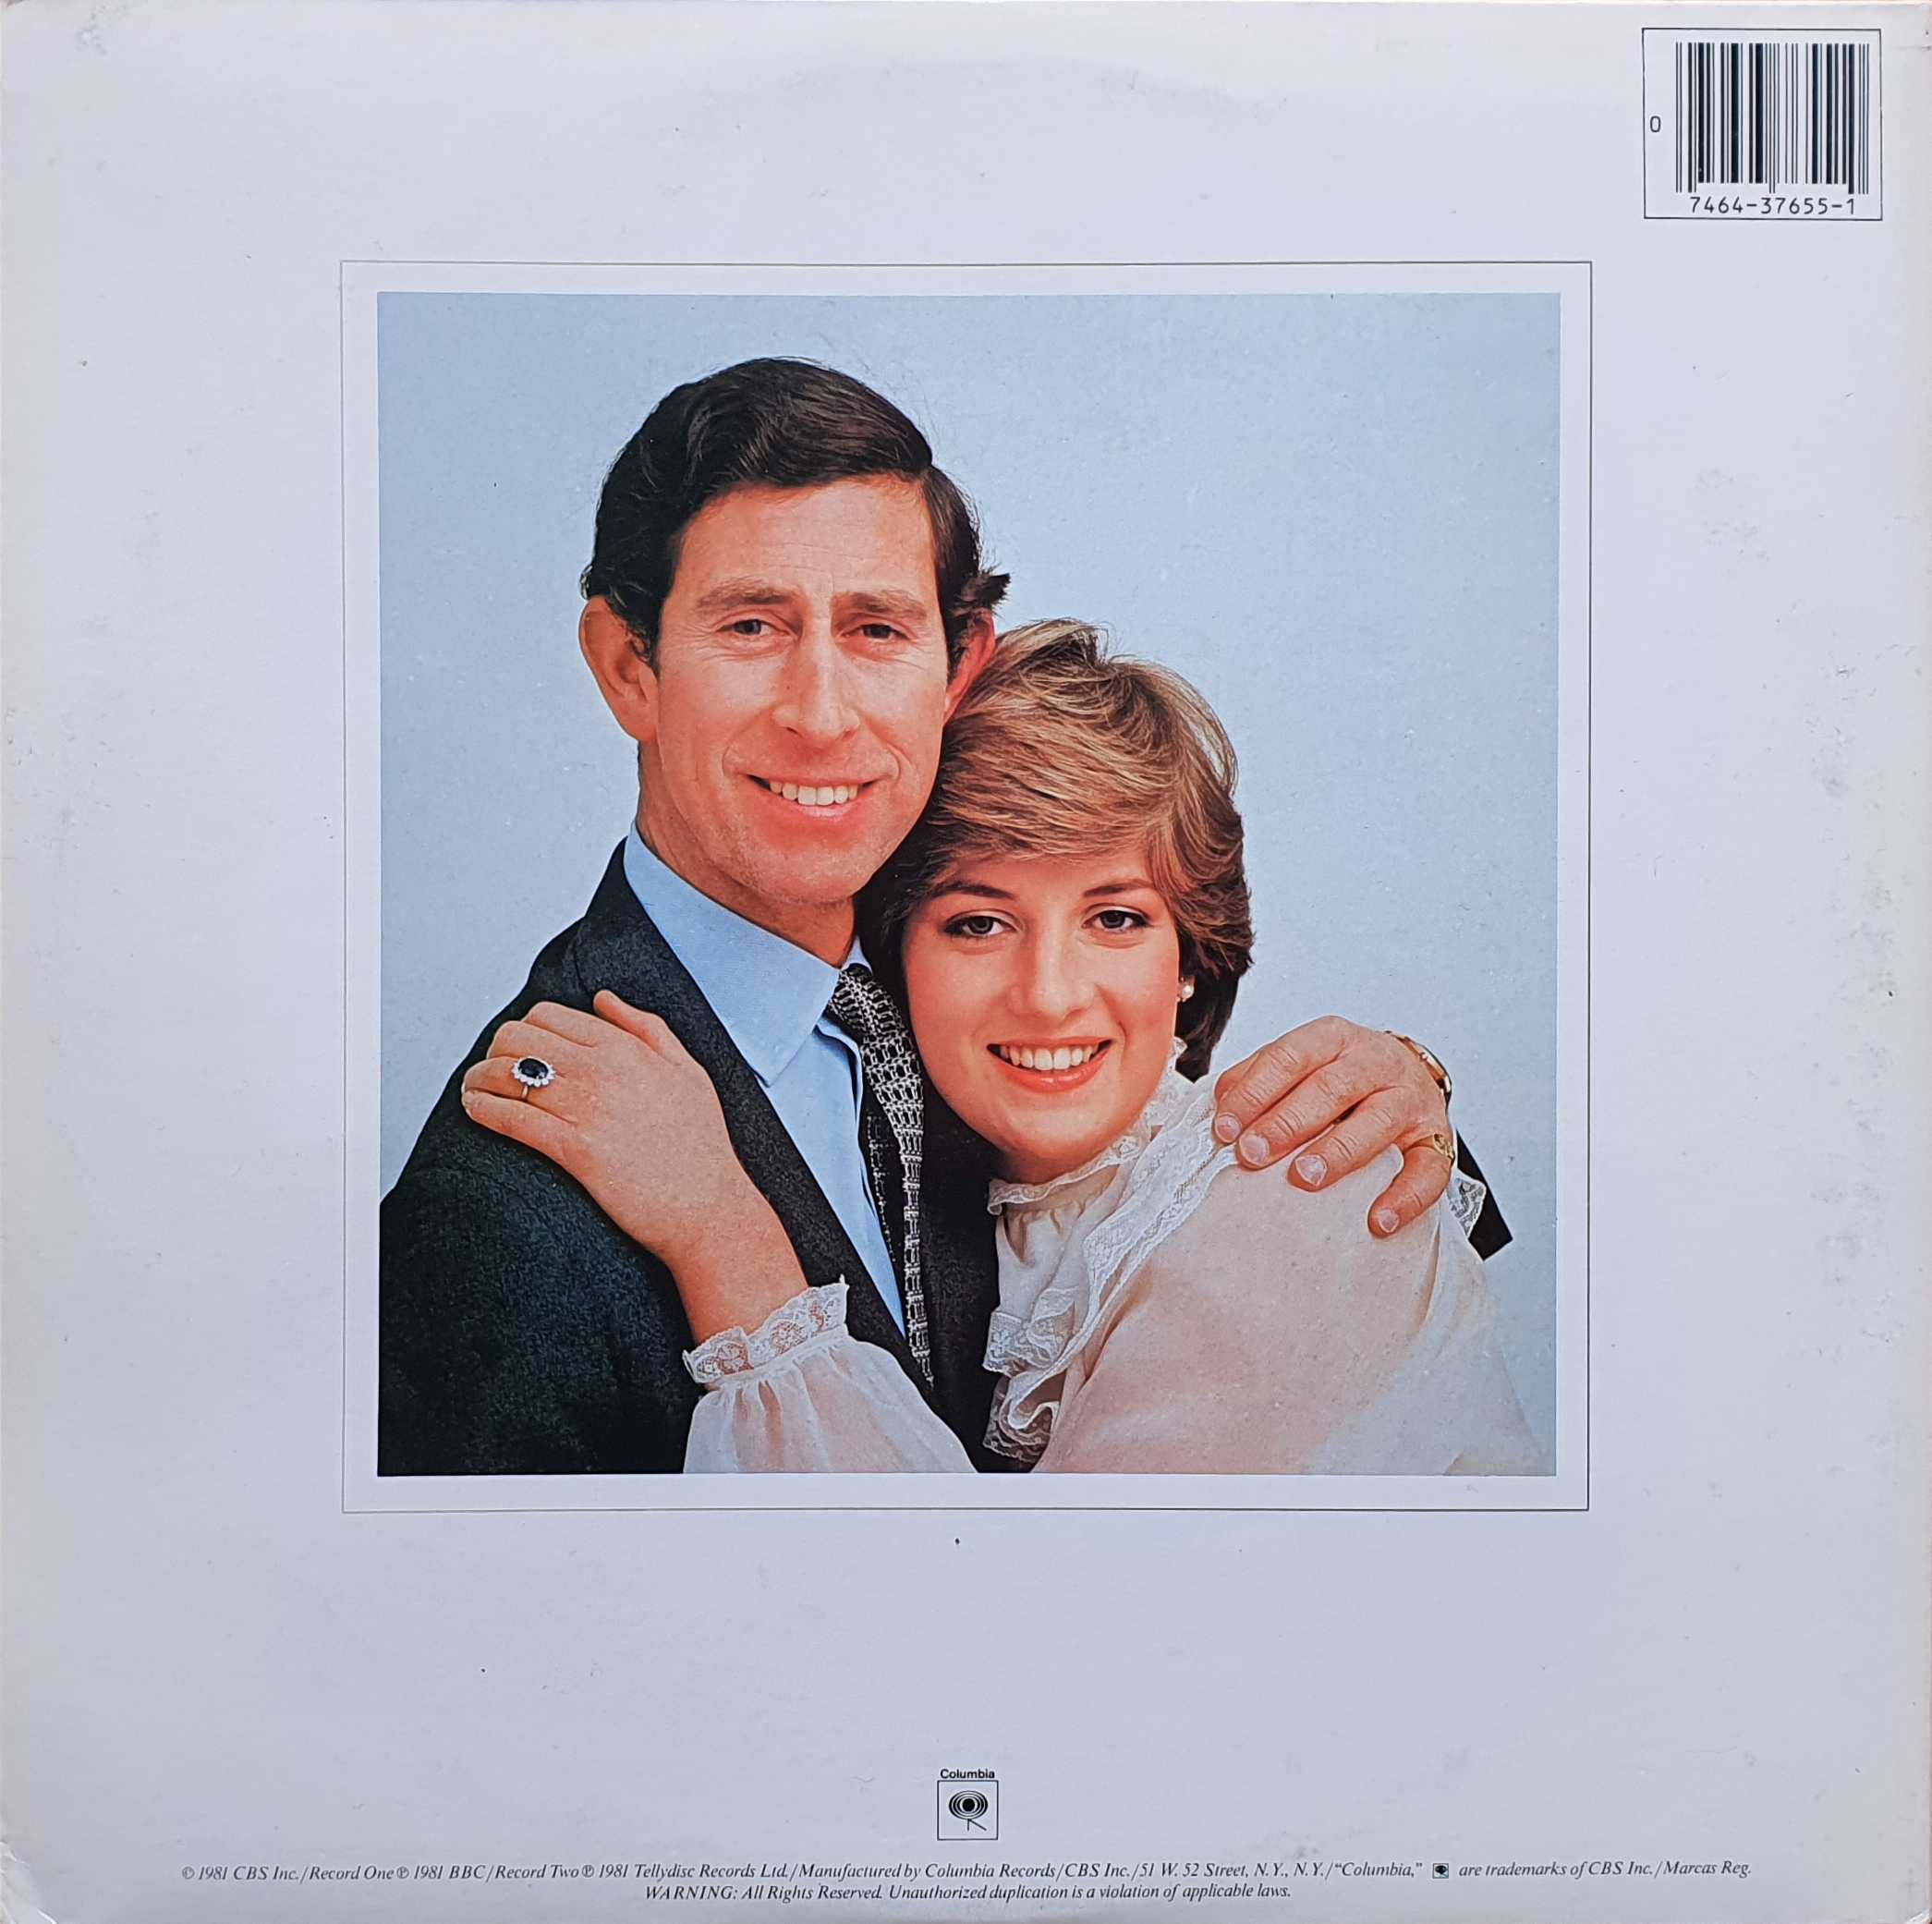 Picture of C2 37655 The royal wedding - Prince Charles / Diana Spencer by artist Various from the BBC records and Tapes library